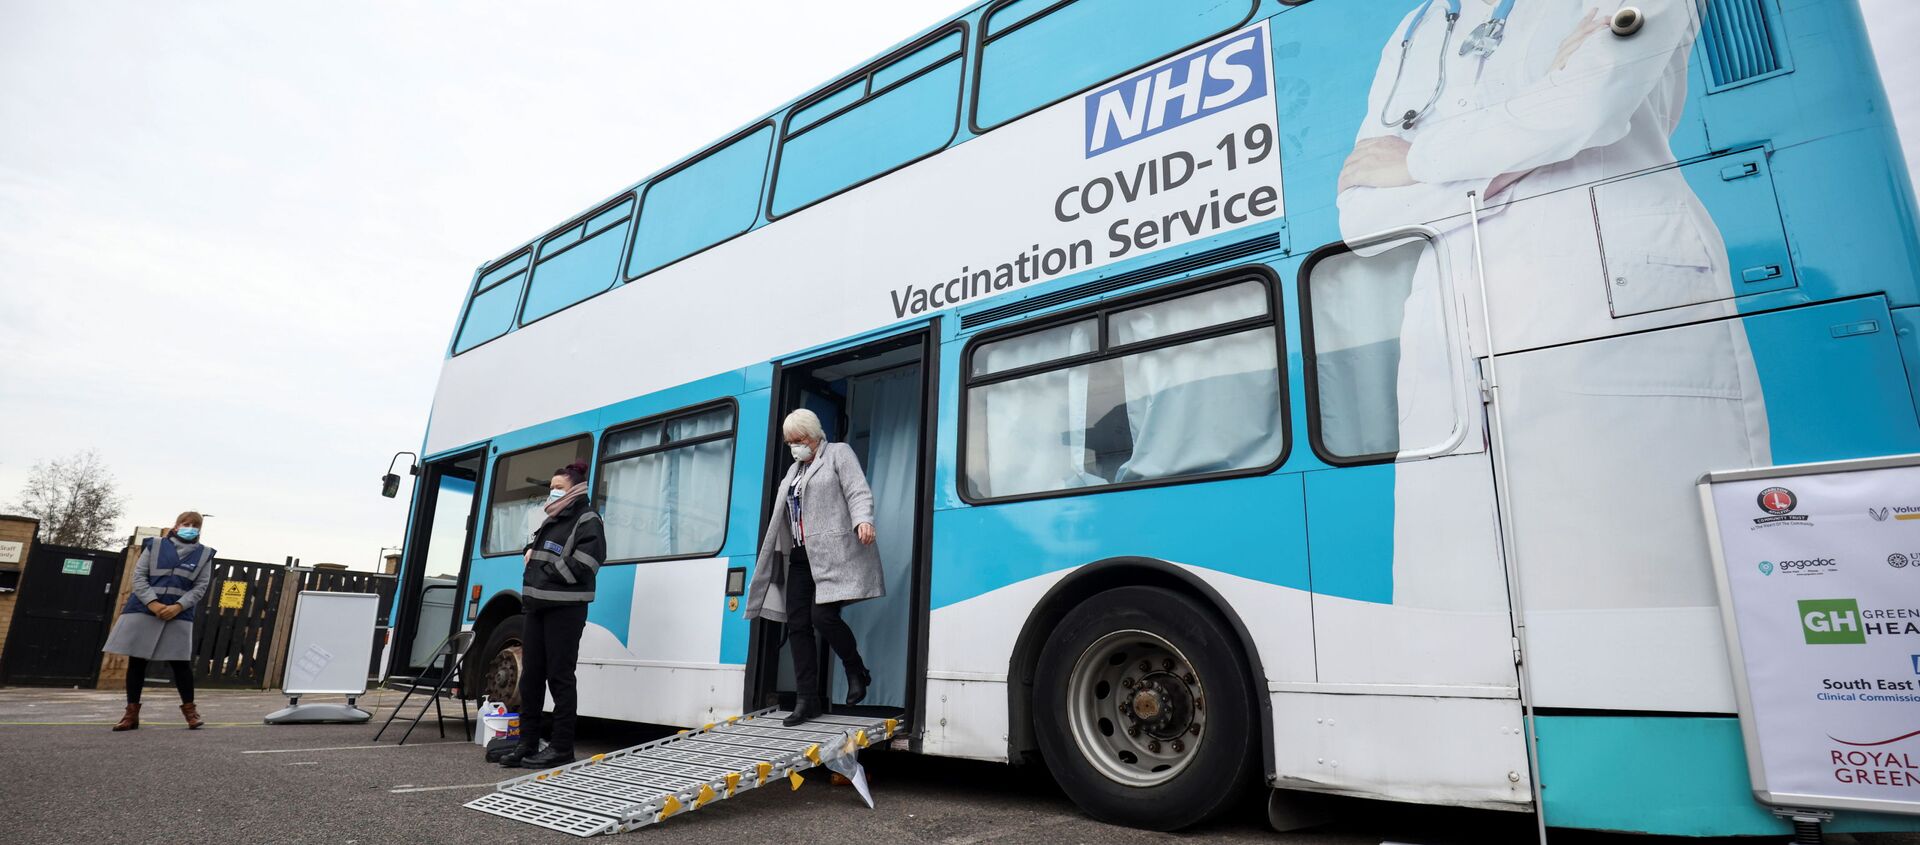 A person gets off a mobile vaccination centre for the coronavirus disease (COVID-19) after receiving the vaccine, in Thamesmead, London, Britain, February 14, 2021. - Sputnik International, 1920, 02.03.2021